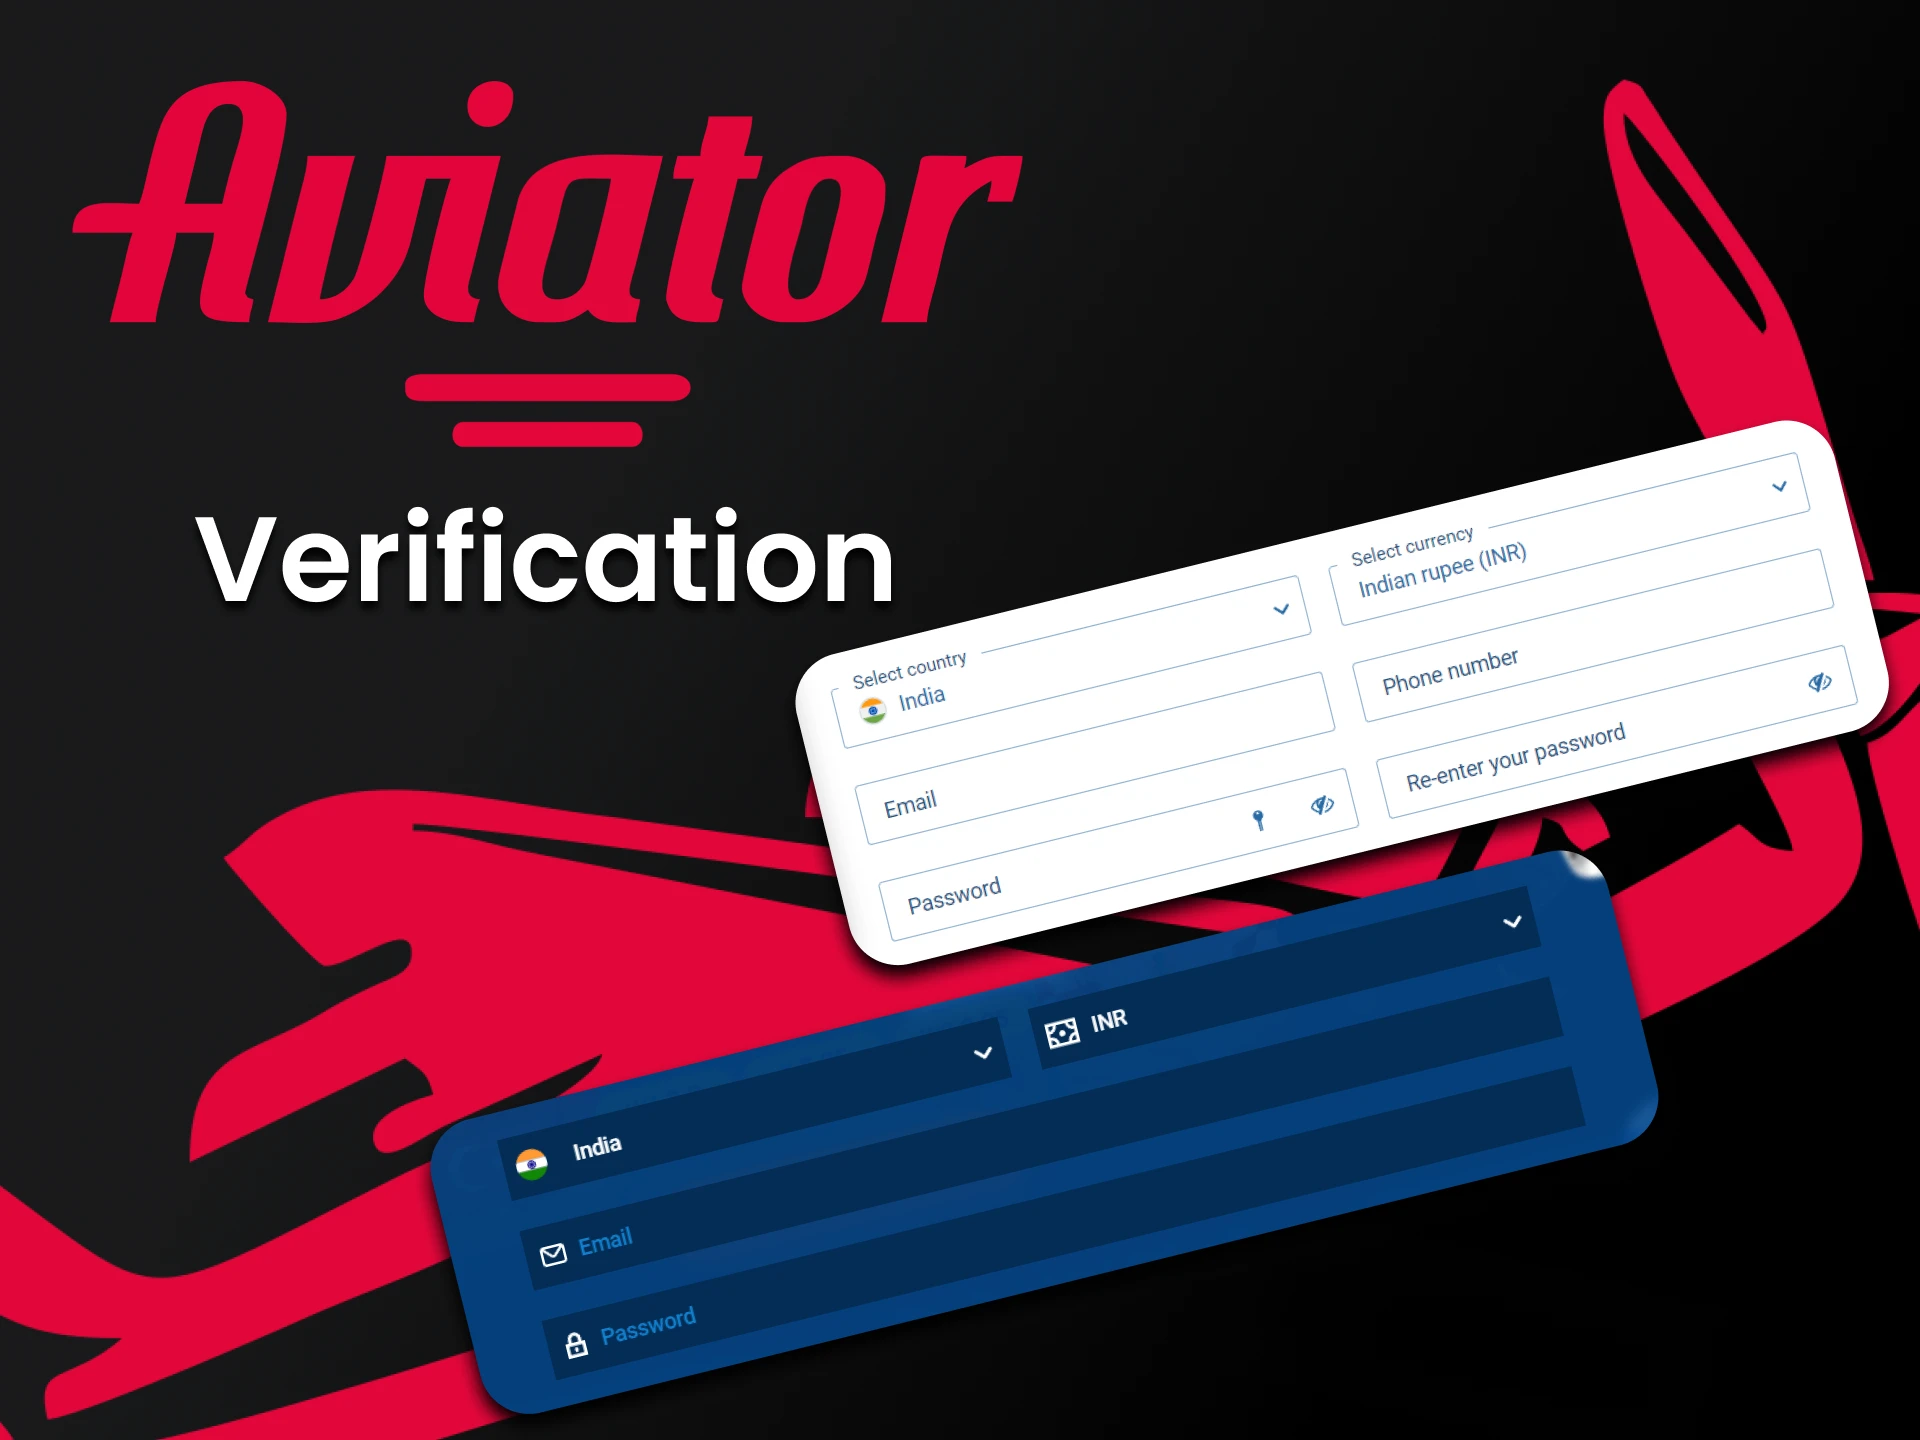 Fill in your personal data for the game Aviator.